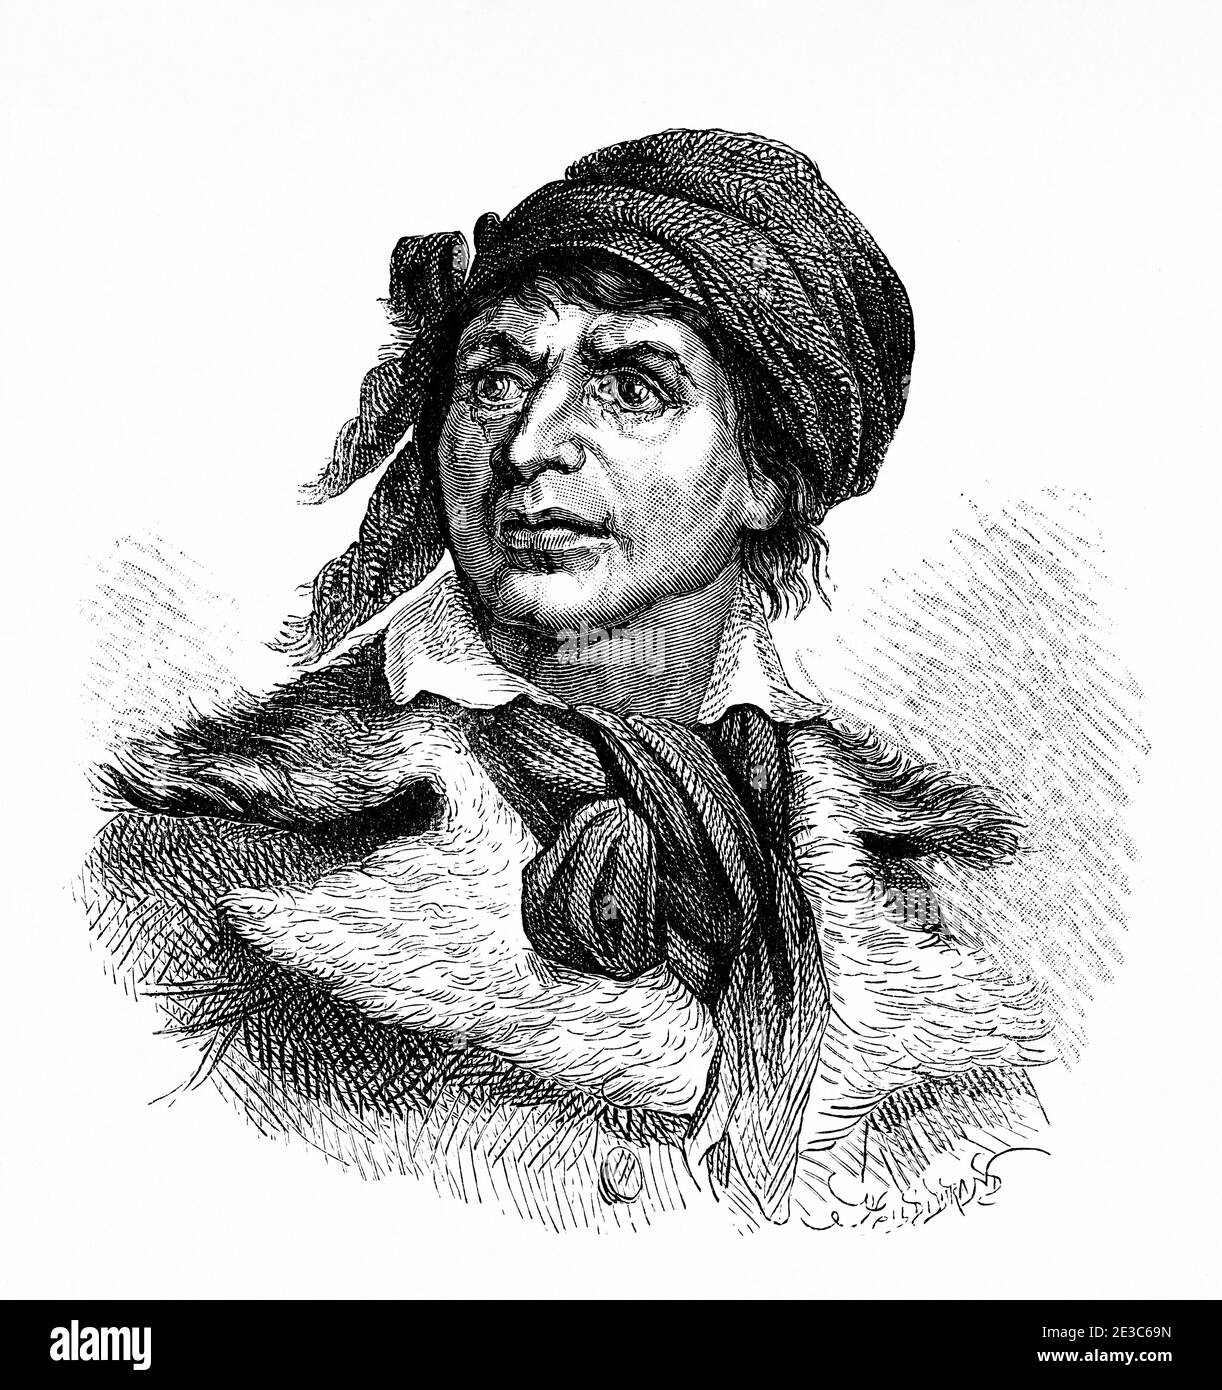 Portrait of Jean-Paul Marat (1743-1793) French politician, physician and journalist. France. Old XIX century engraving illustration. Les Français Illustres by Gustave Demoulin 1897 Stock Photo